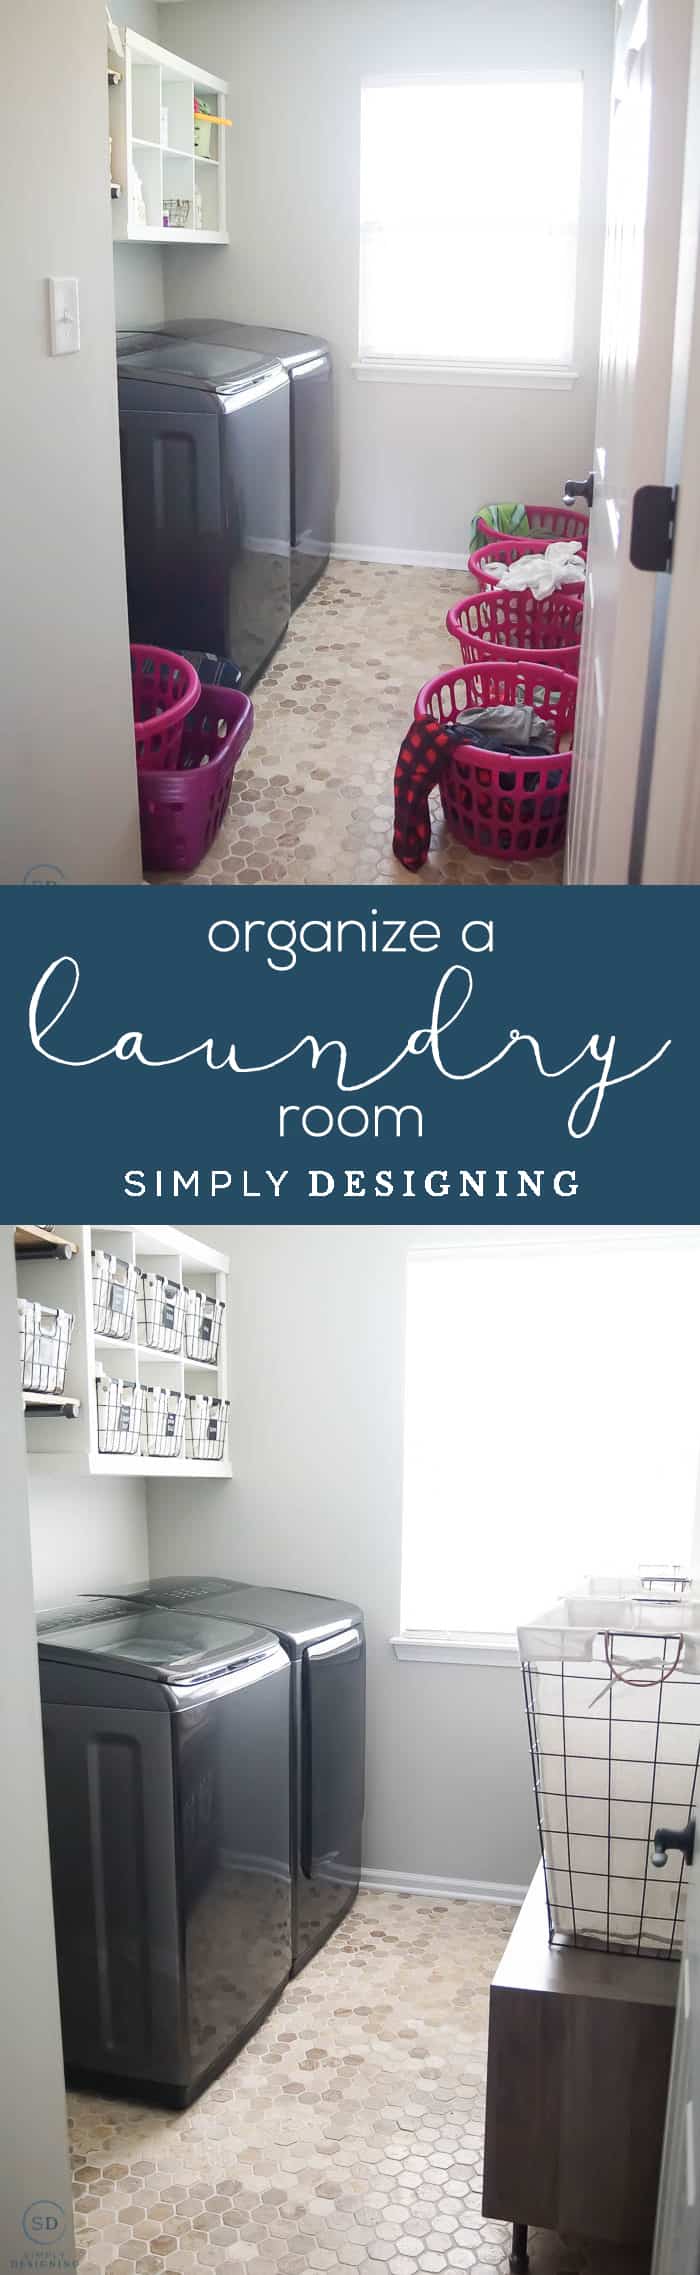 How to Organize a Laundry Room - Laundry Room Makeover - before and after